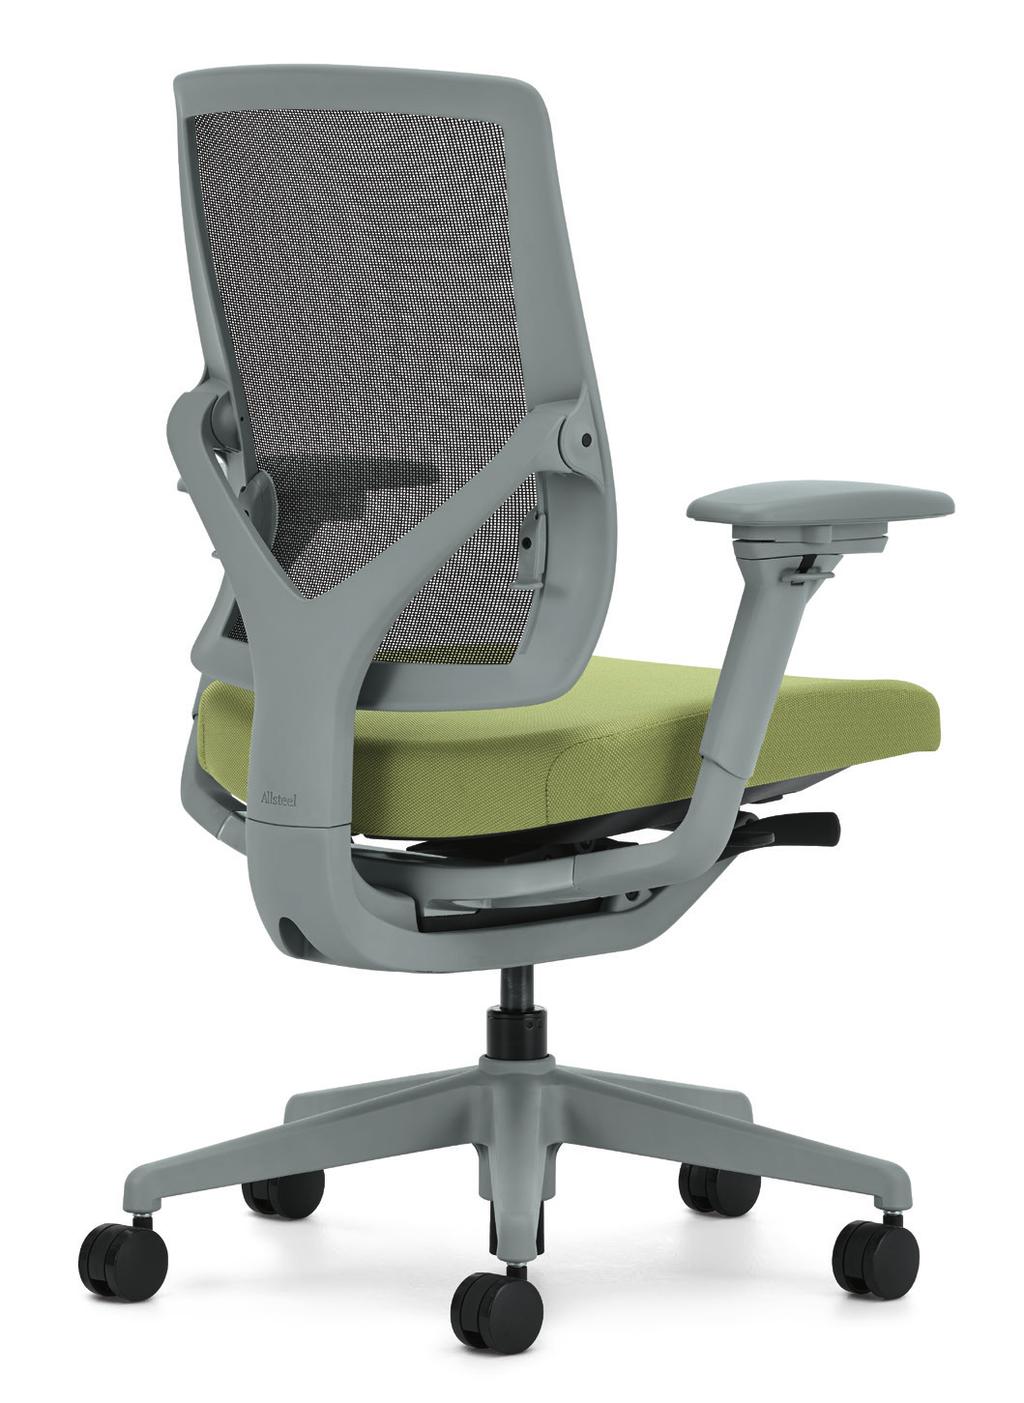 Designed by Marcus Koepke, the work chair features a contemporary, slim profile for any environment.